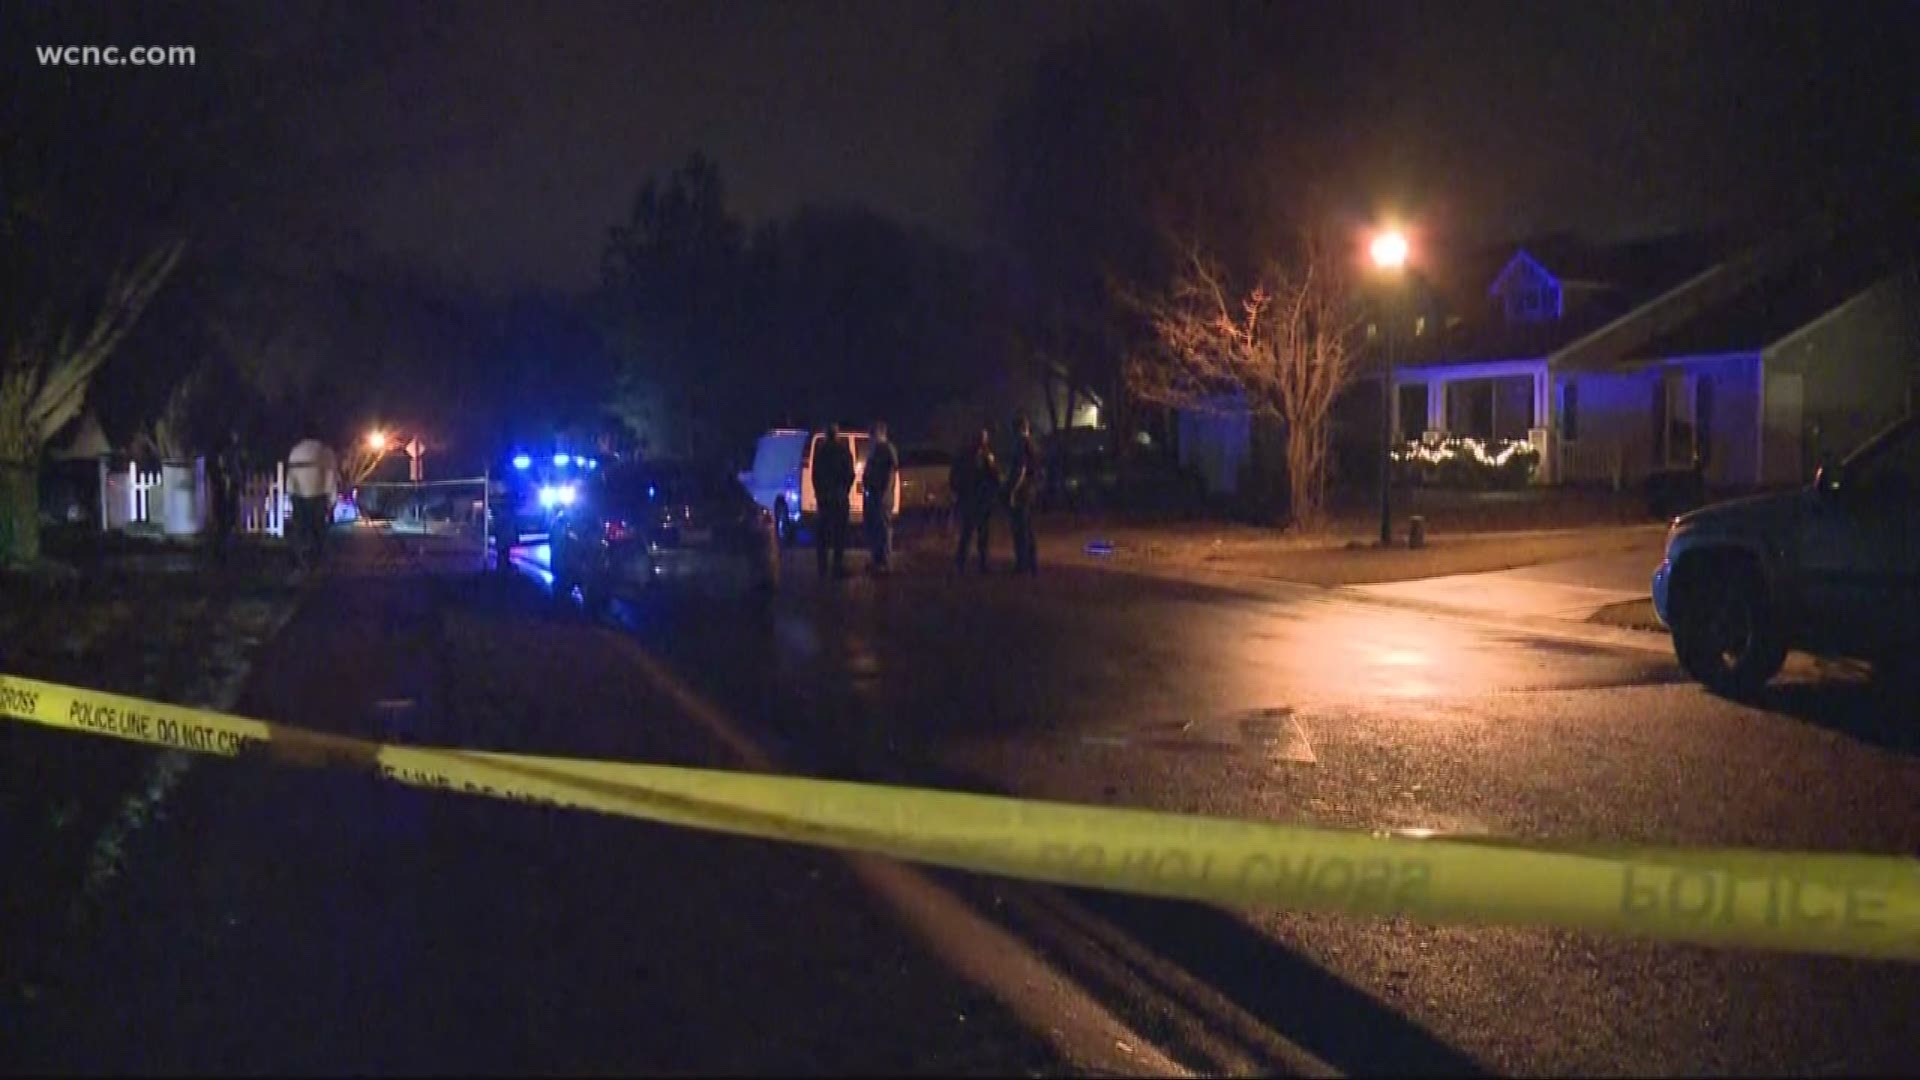 The new year is off to a deadly start in the Queen City after Charlotte's first homicide of the year.